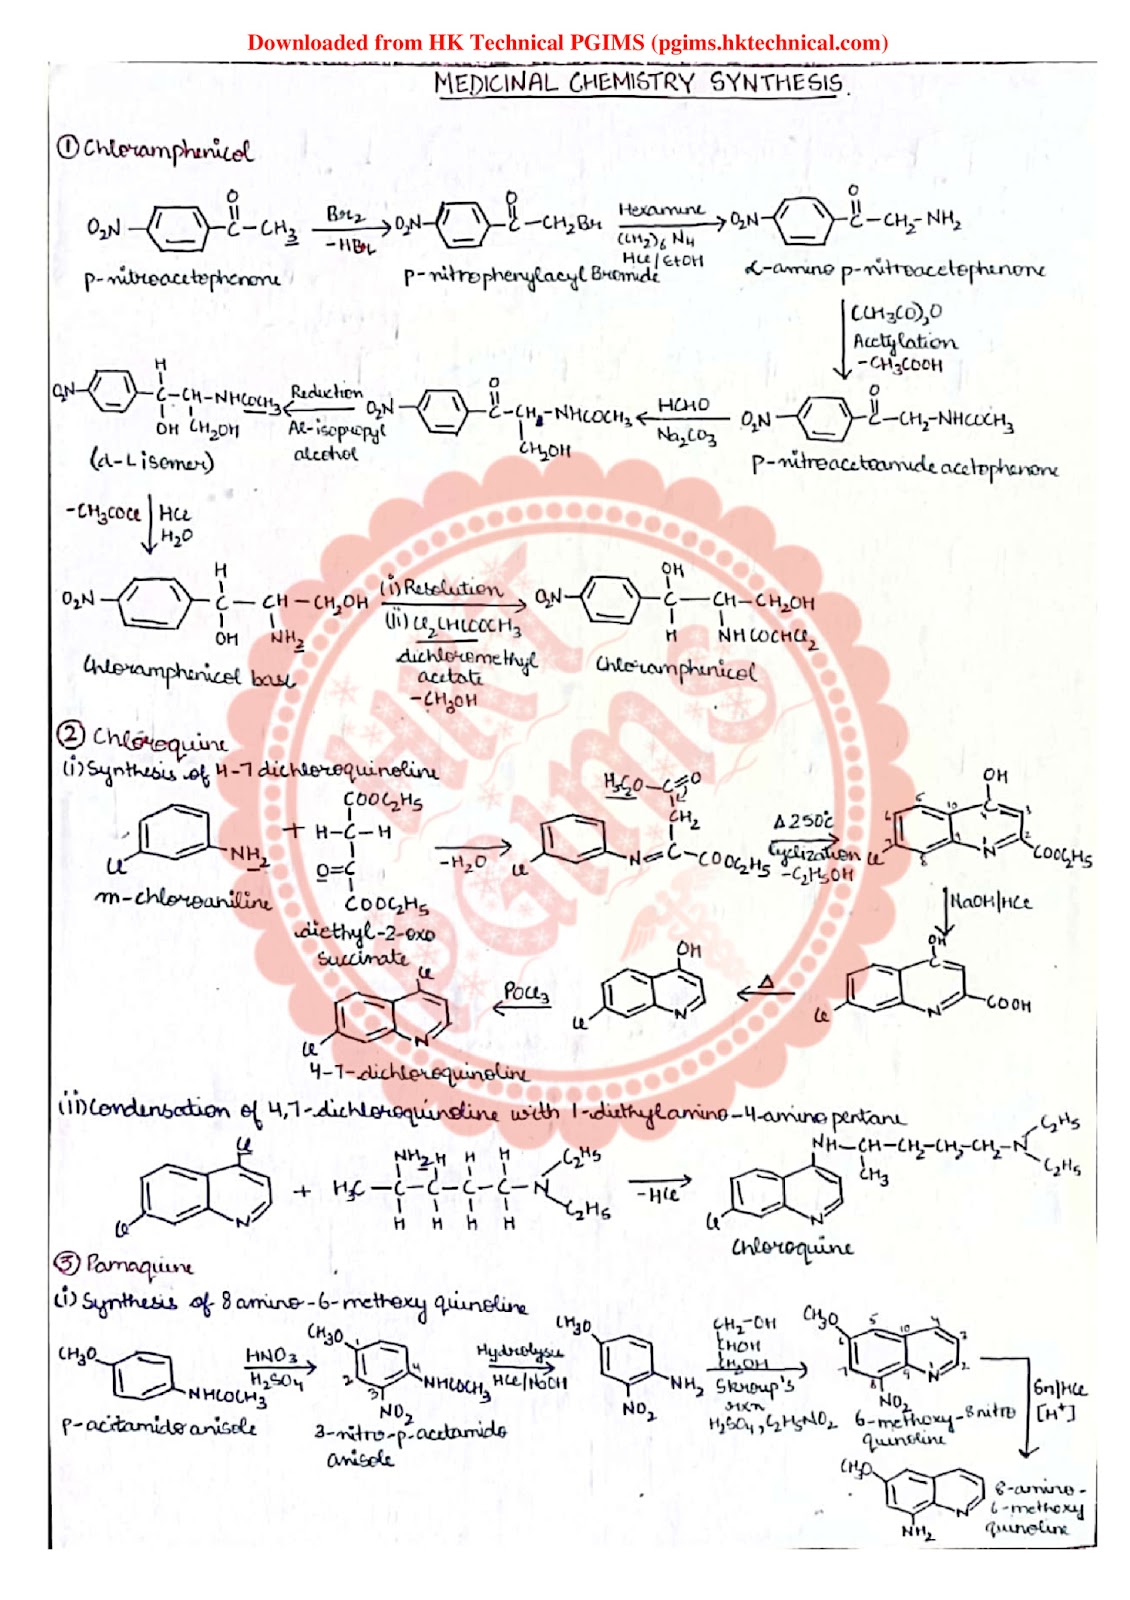 Medicinal Chemistry-III Synthesis 6th Semester B.Pharmacy ,BP601T Medicinal chemistry III,BPharmacy,Handwritten Notes,BPharm 6th Semester,Important Exam Notes,